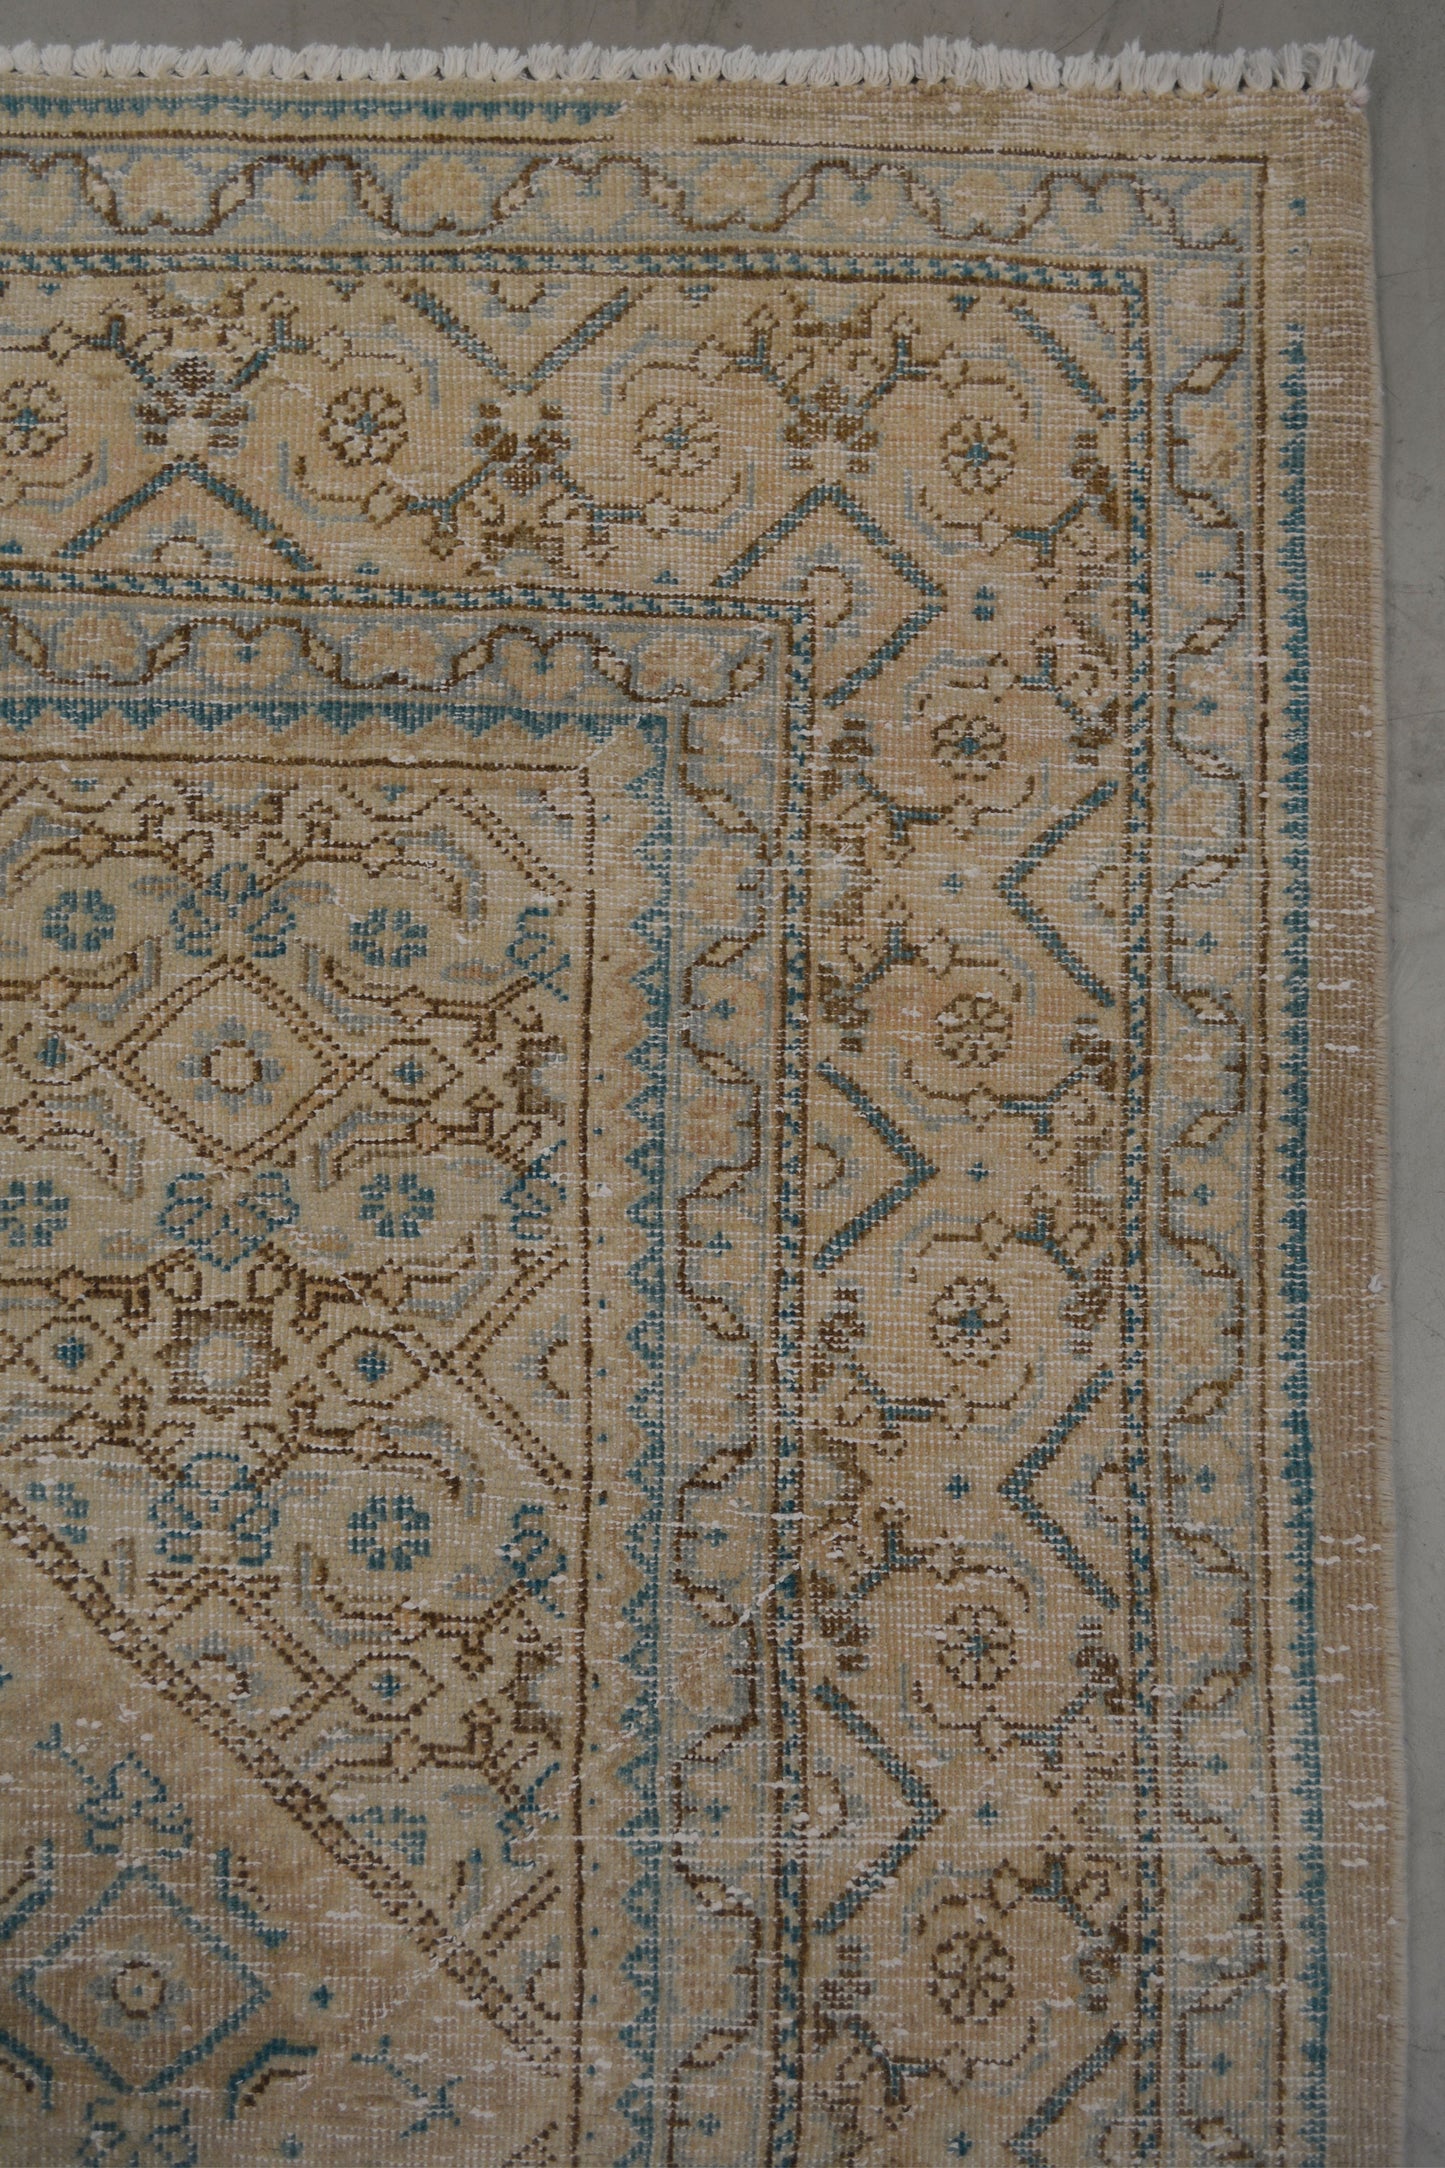 The rug's center renders a big rhomb which has small rhombuses inside. 